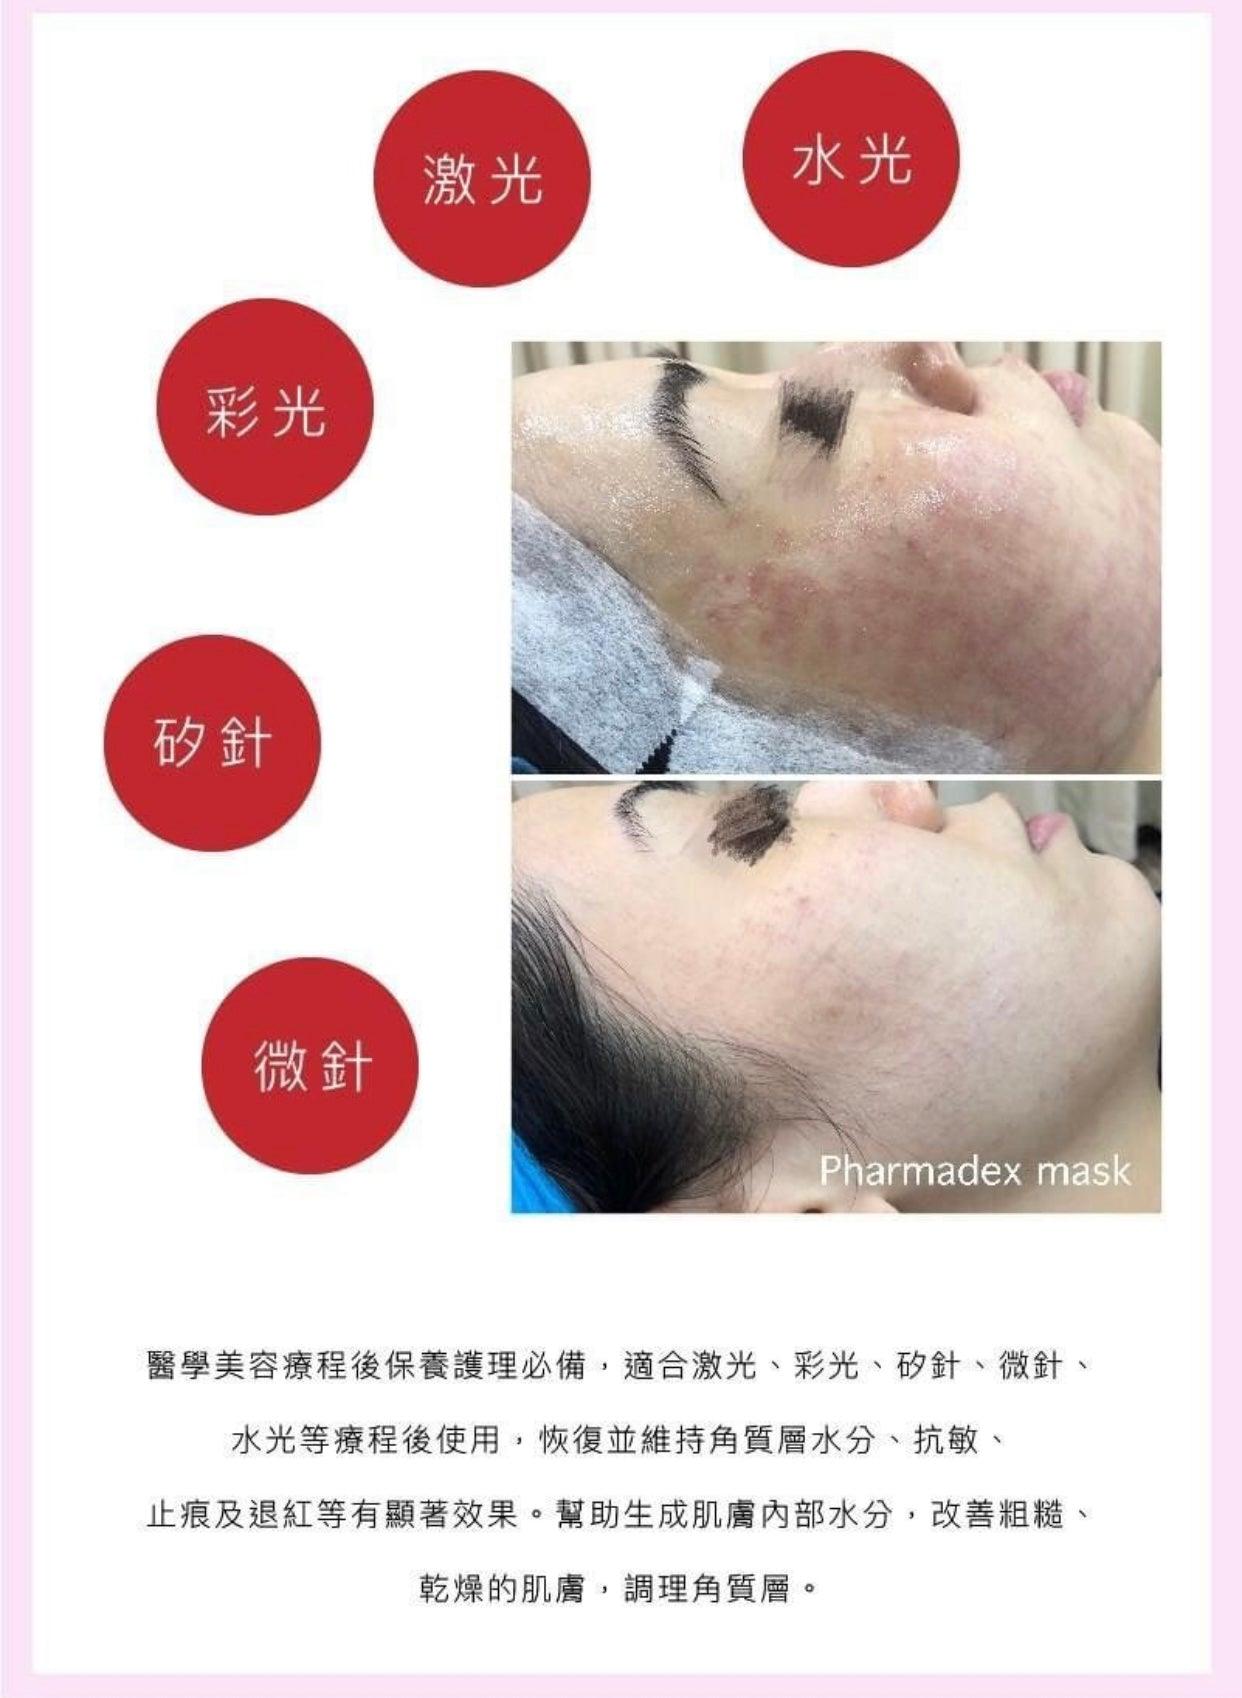 PHARMADEX MSE Instant Soothing Mask降紅修復補水面膜 - Beauty’s 5skin 